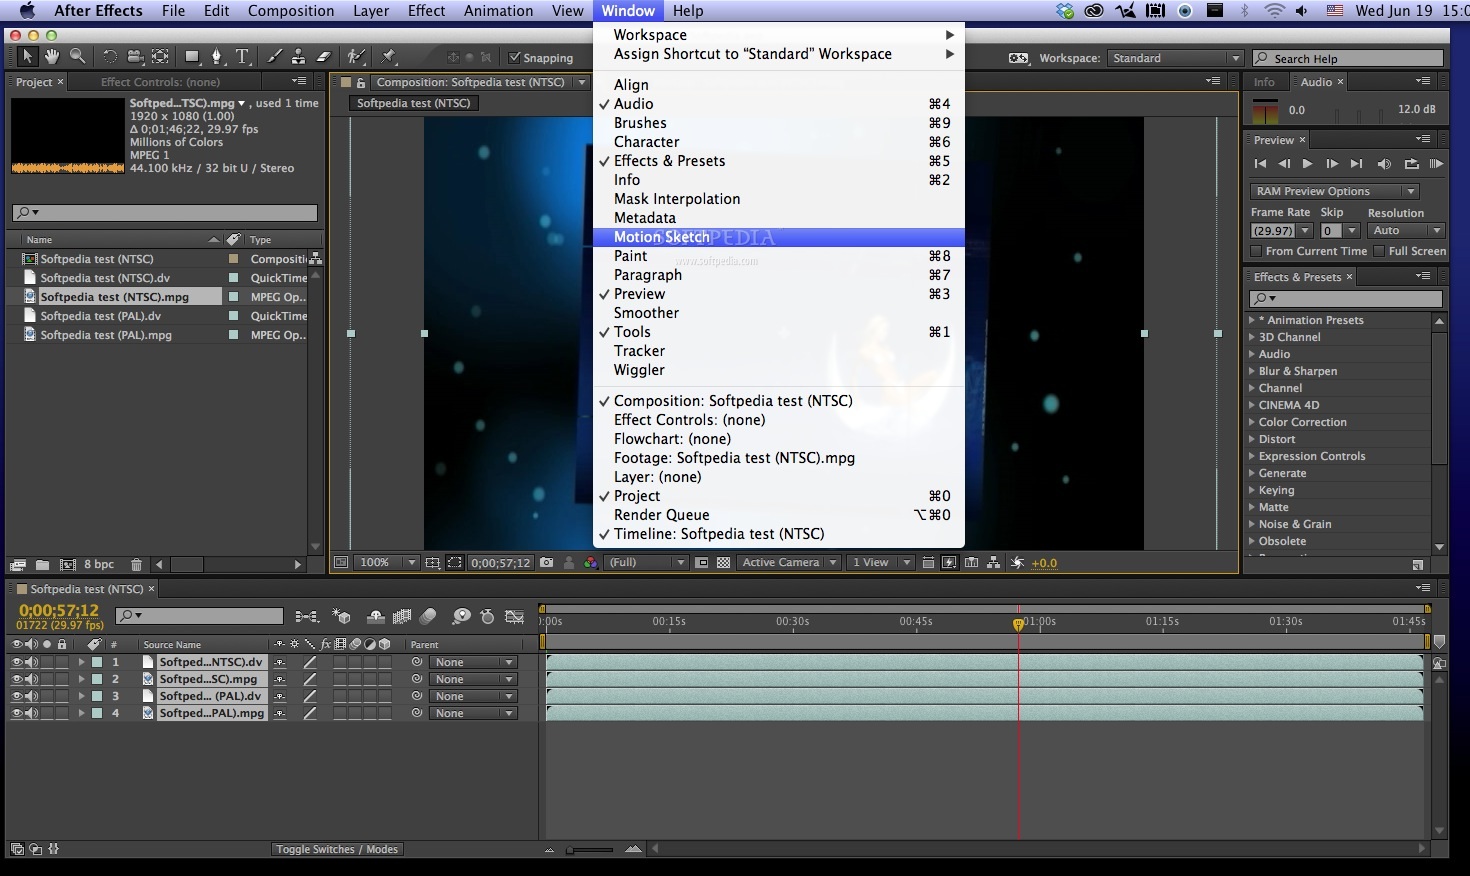 download quicktime after effect